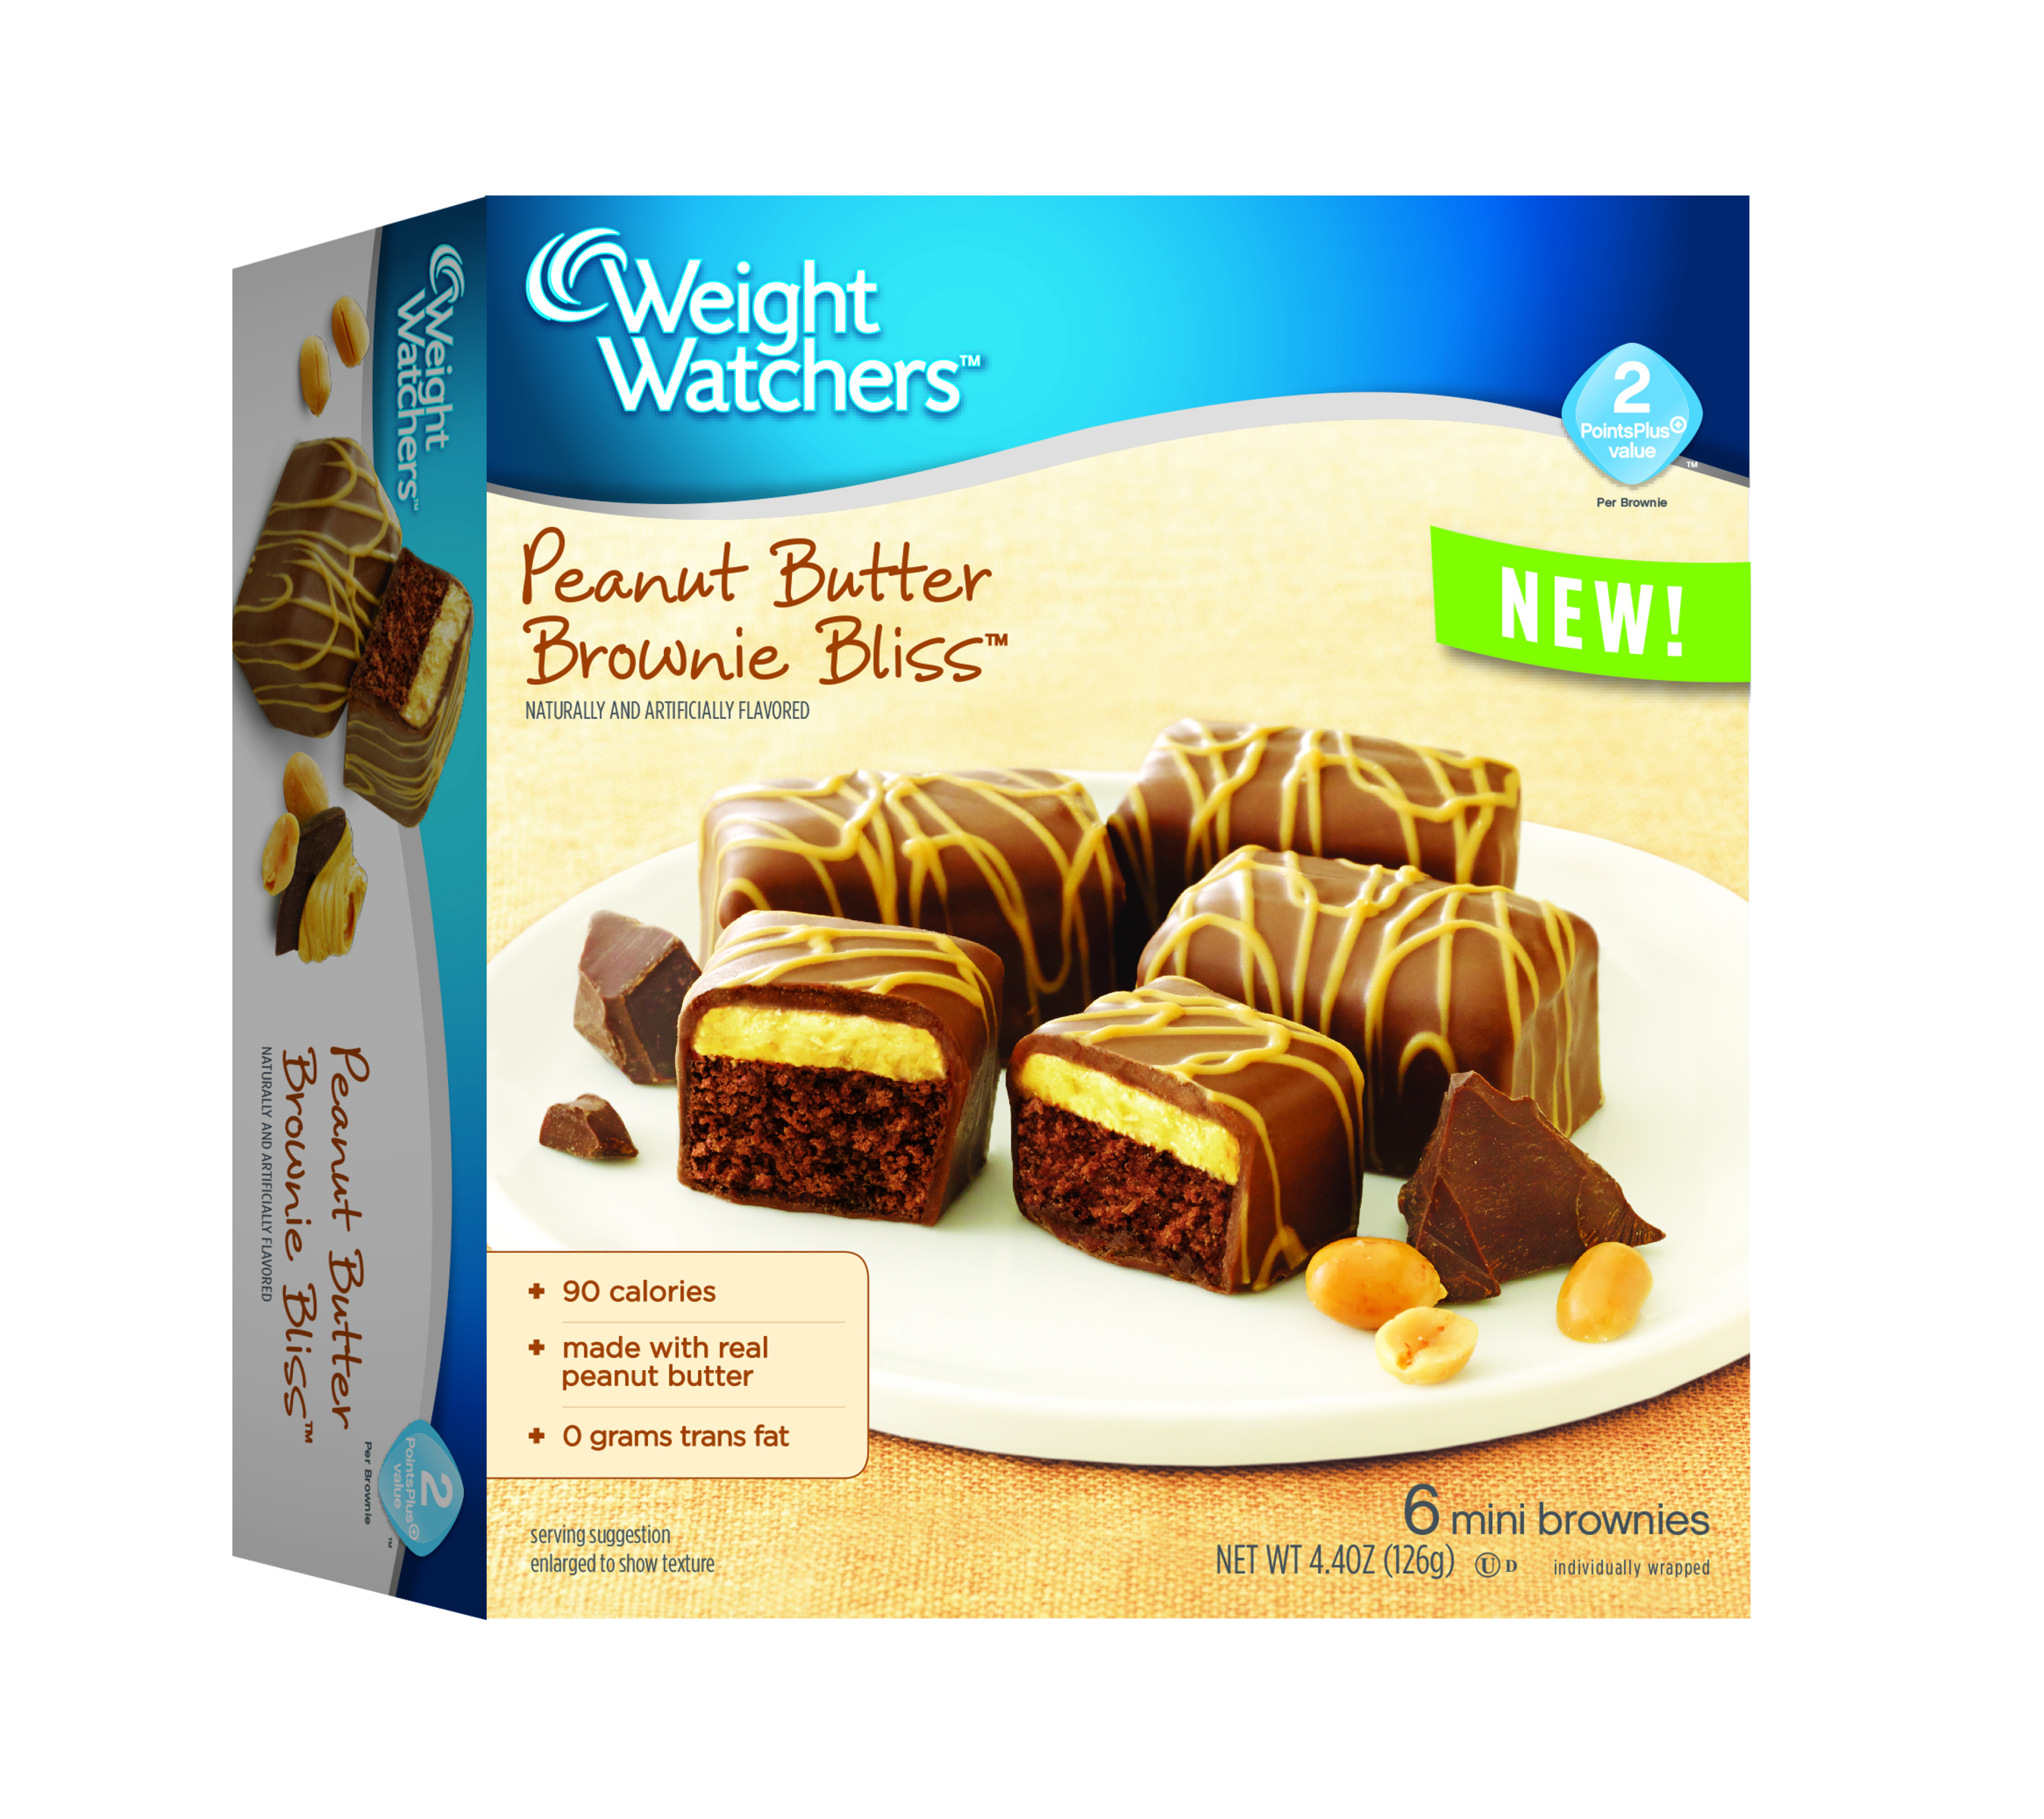 Peanut Butter Brownie Bliss(TM) is an indulgent brownie, layered with creamy, real peanut butter and covered in a chocolaty coating. (PRNewsFoto/Weight Watchers Sweet Baked Good)